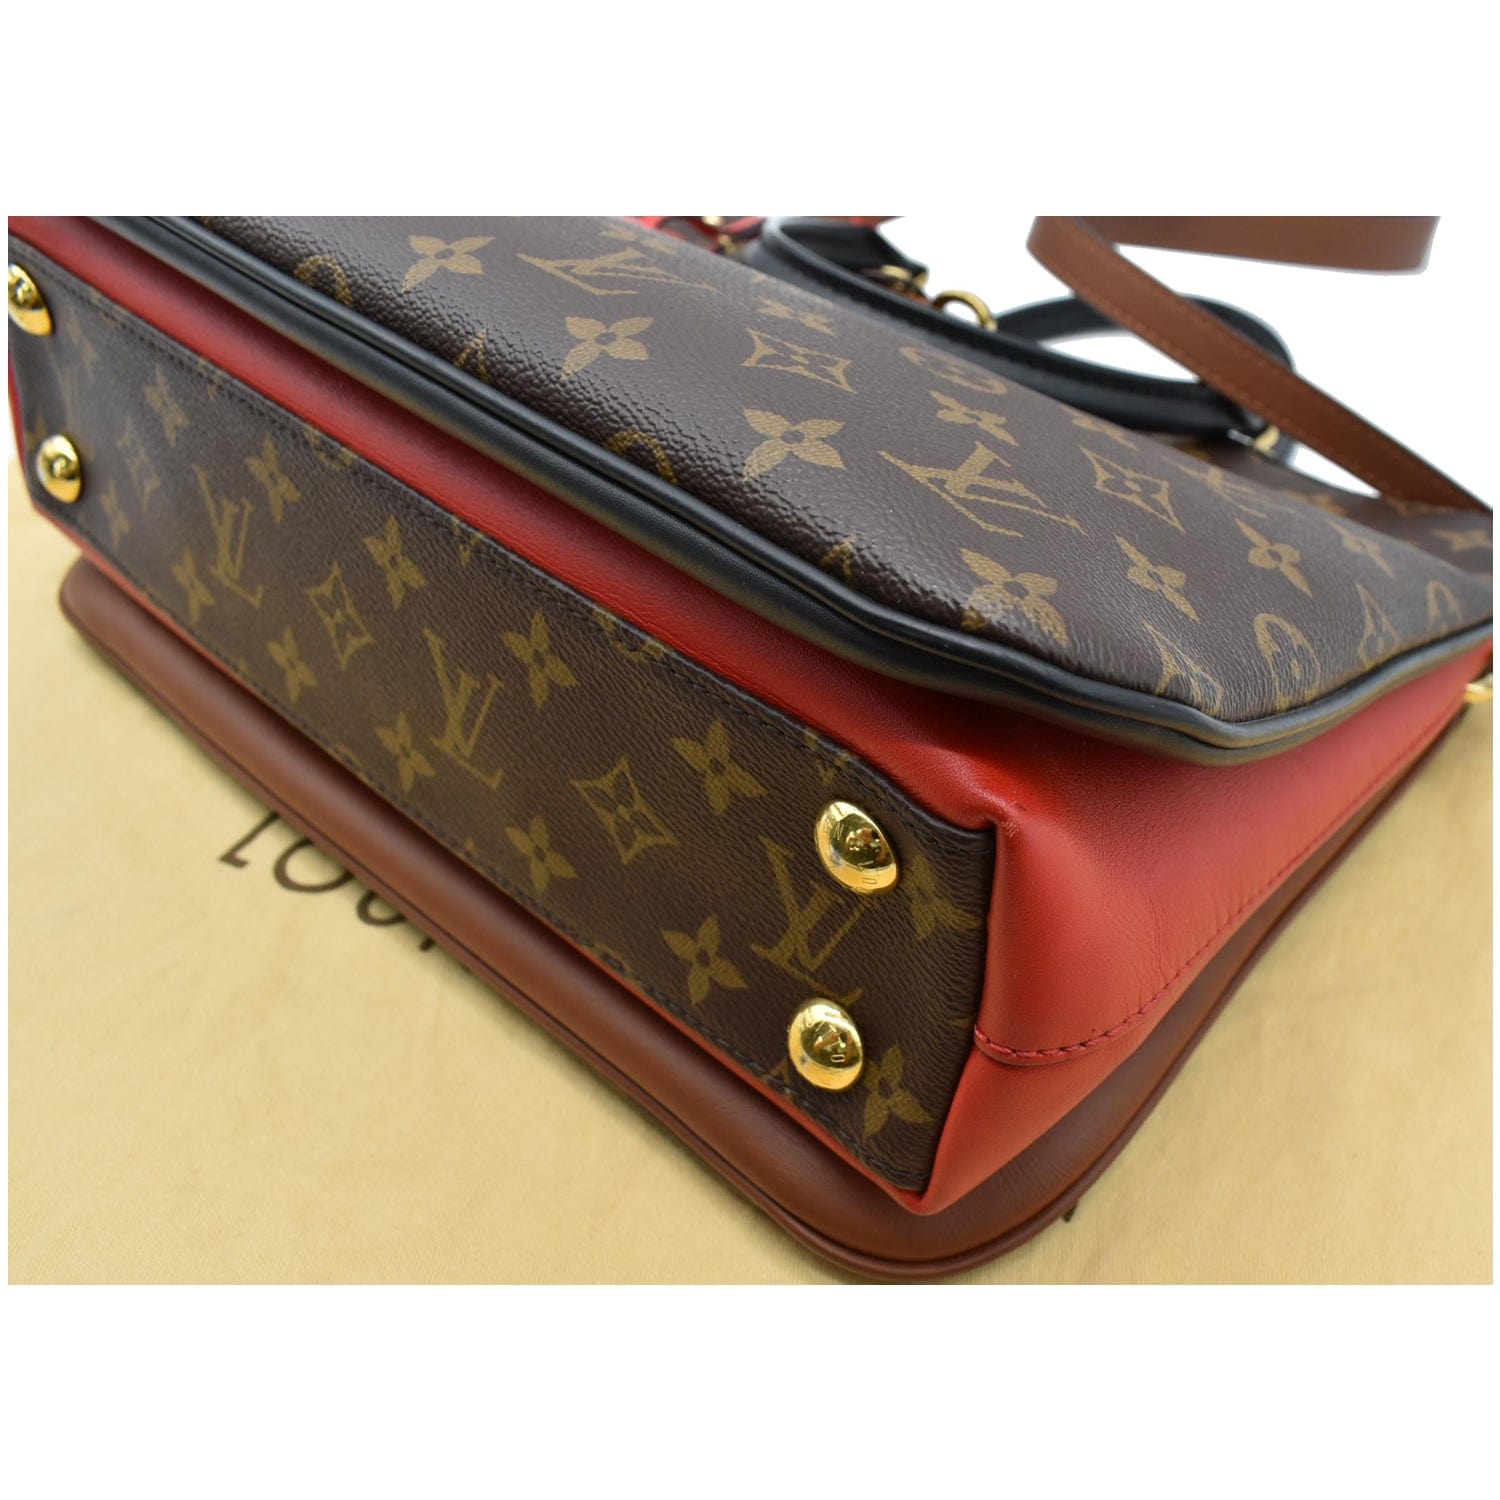 Louis Vuitton Millefeuille Handbag Monogram Canvas and Leather Red